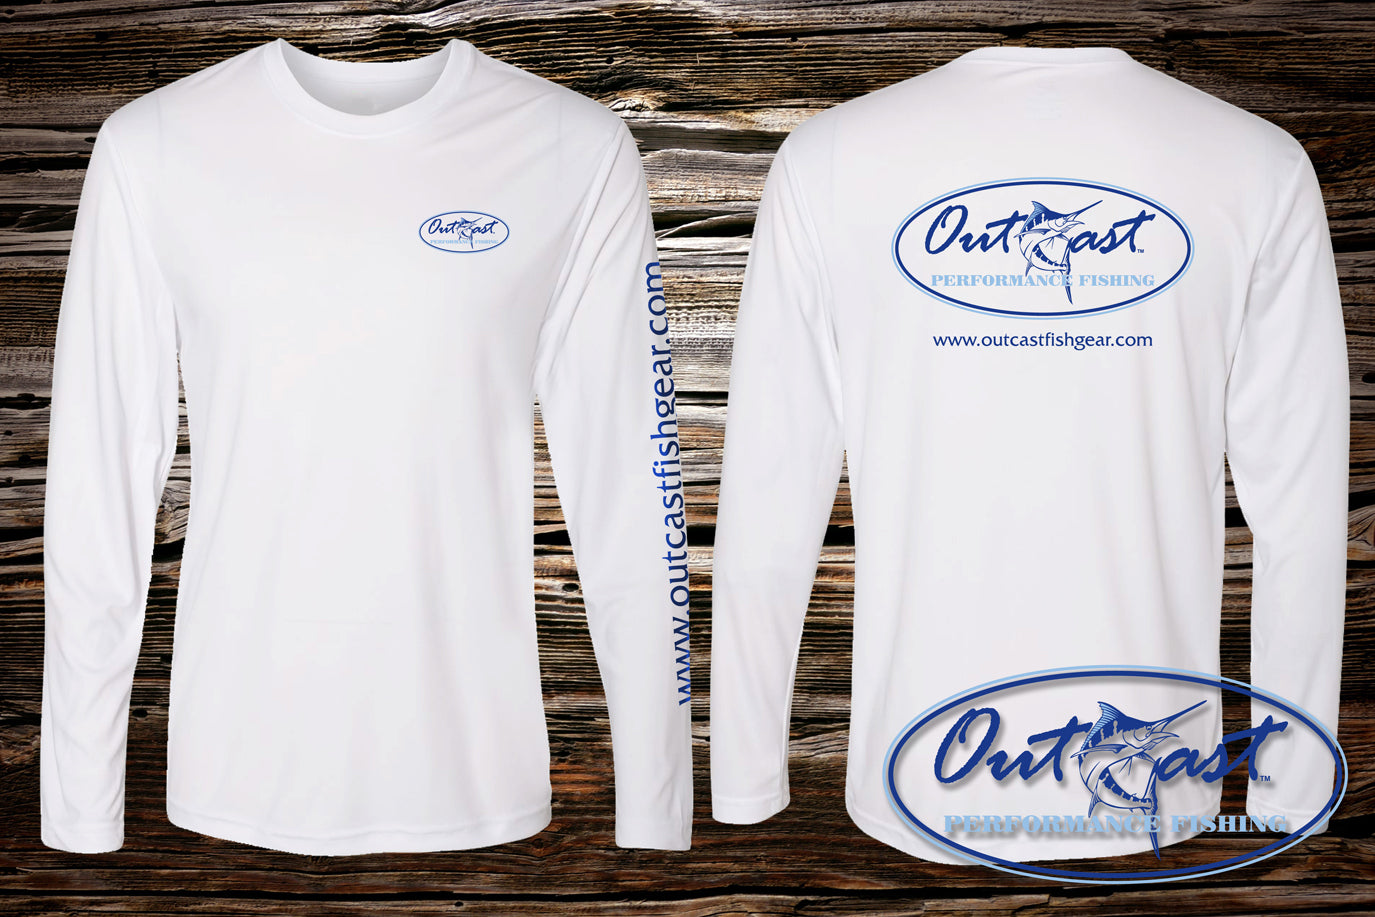 white dry fit shirt